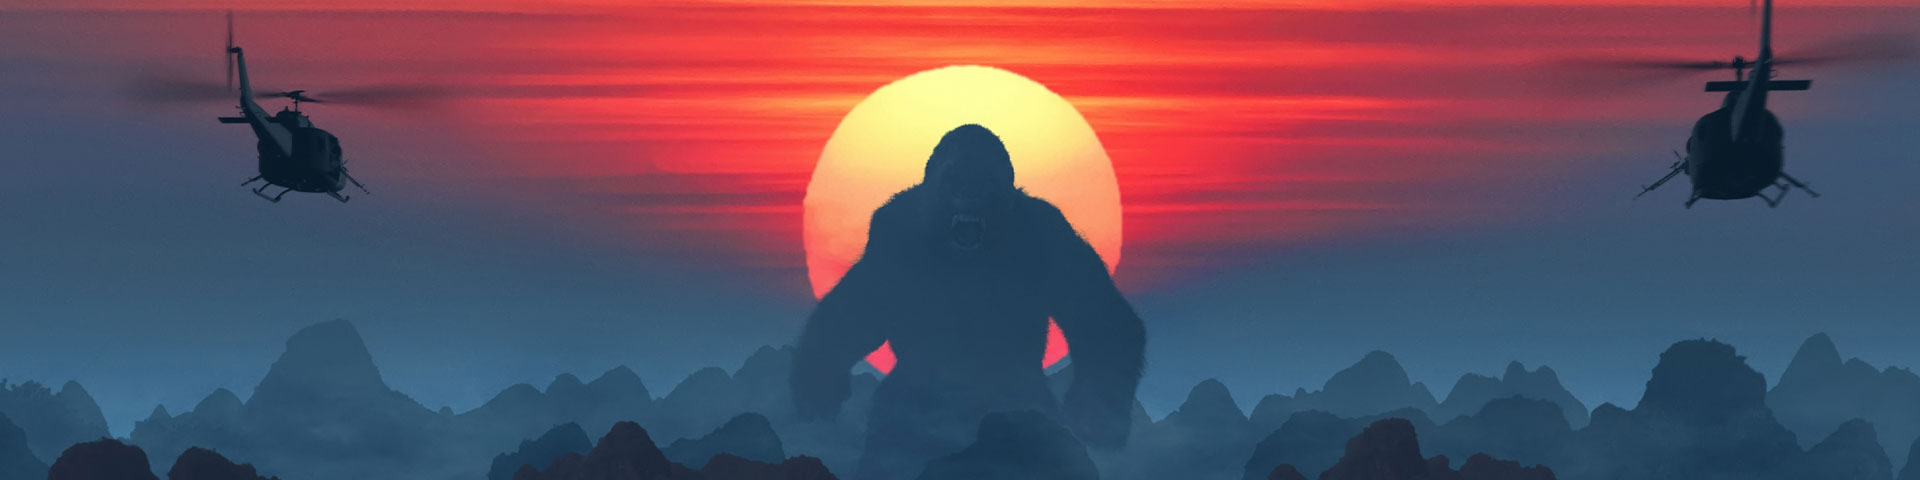 Helicopters fly toward a giant ape. The ape is backlit by a sunset; small mountains appear at his feet.